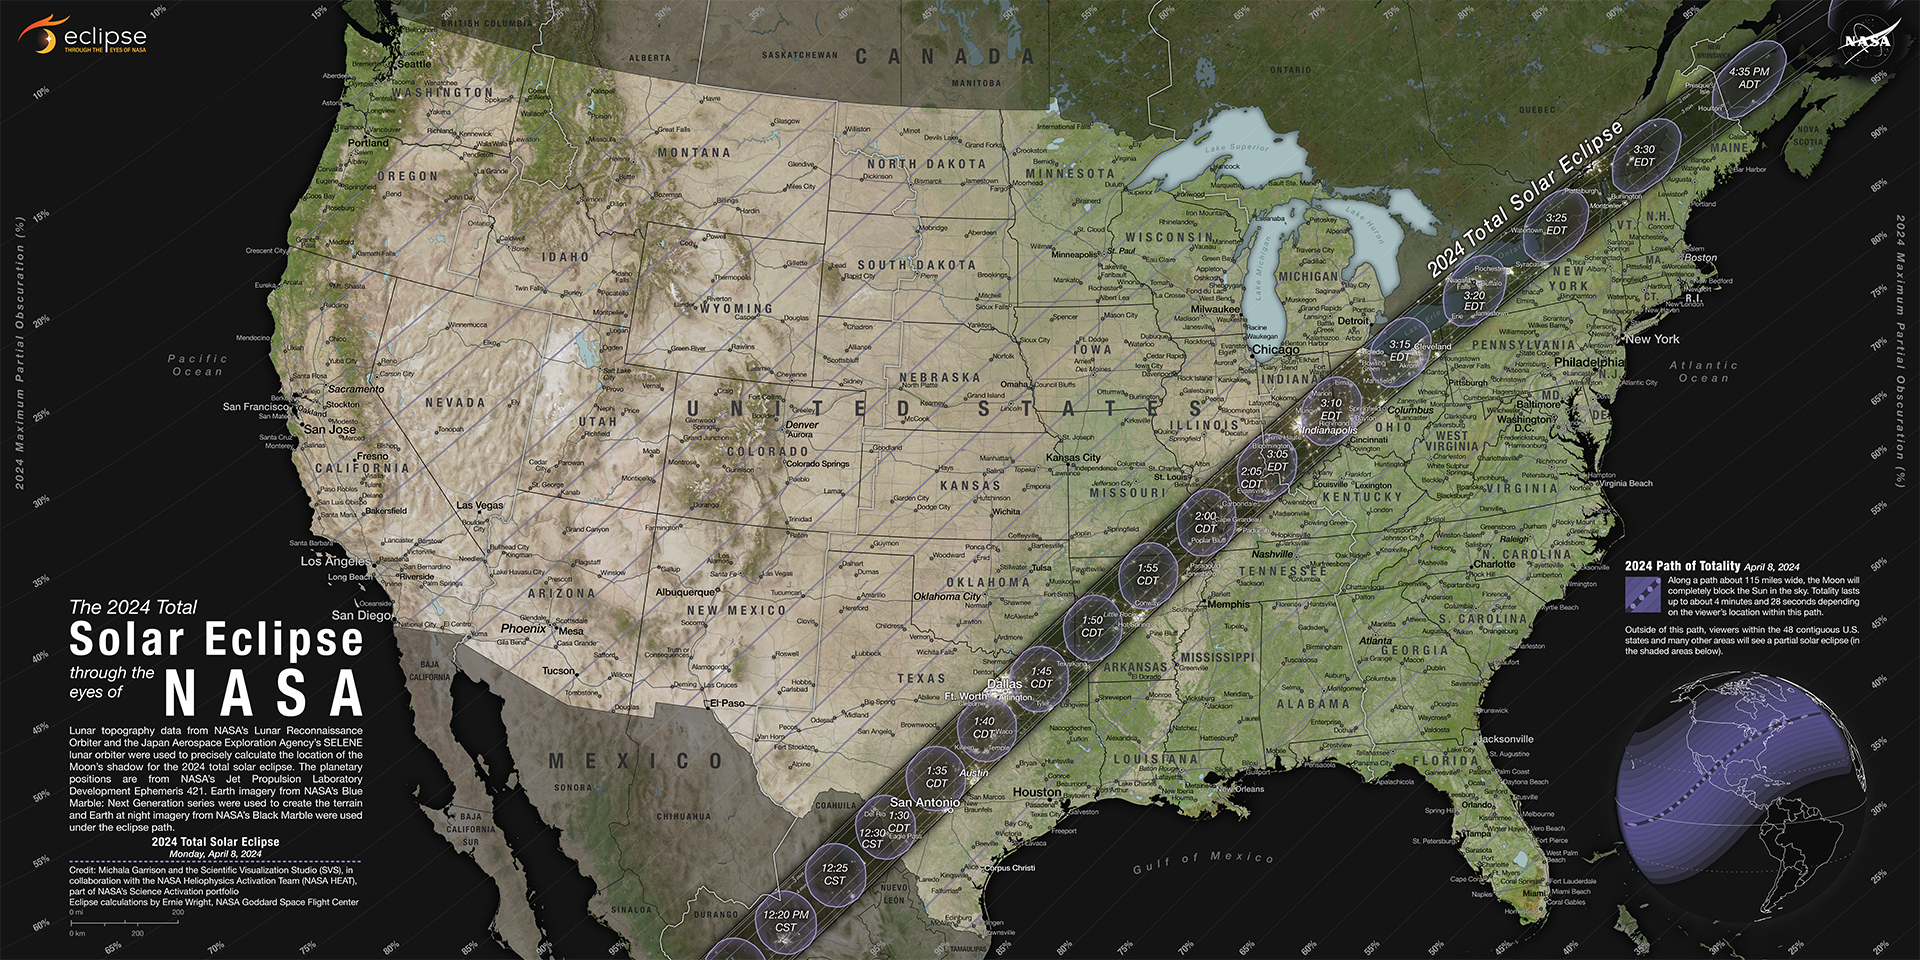 Path of the 2024 Solar Eclipse